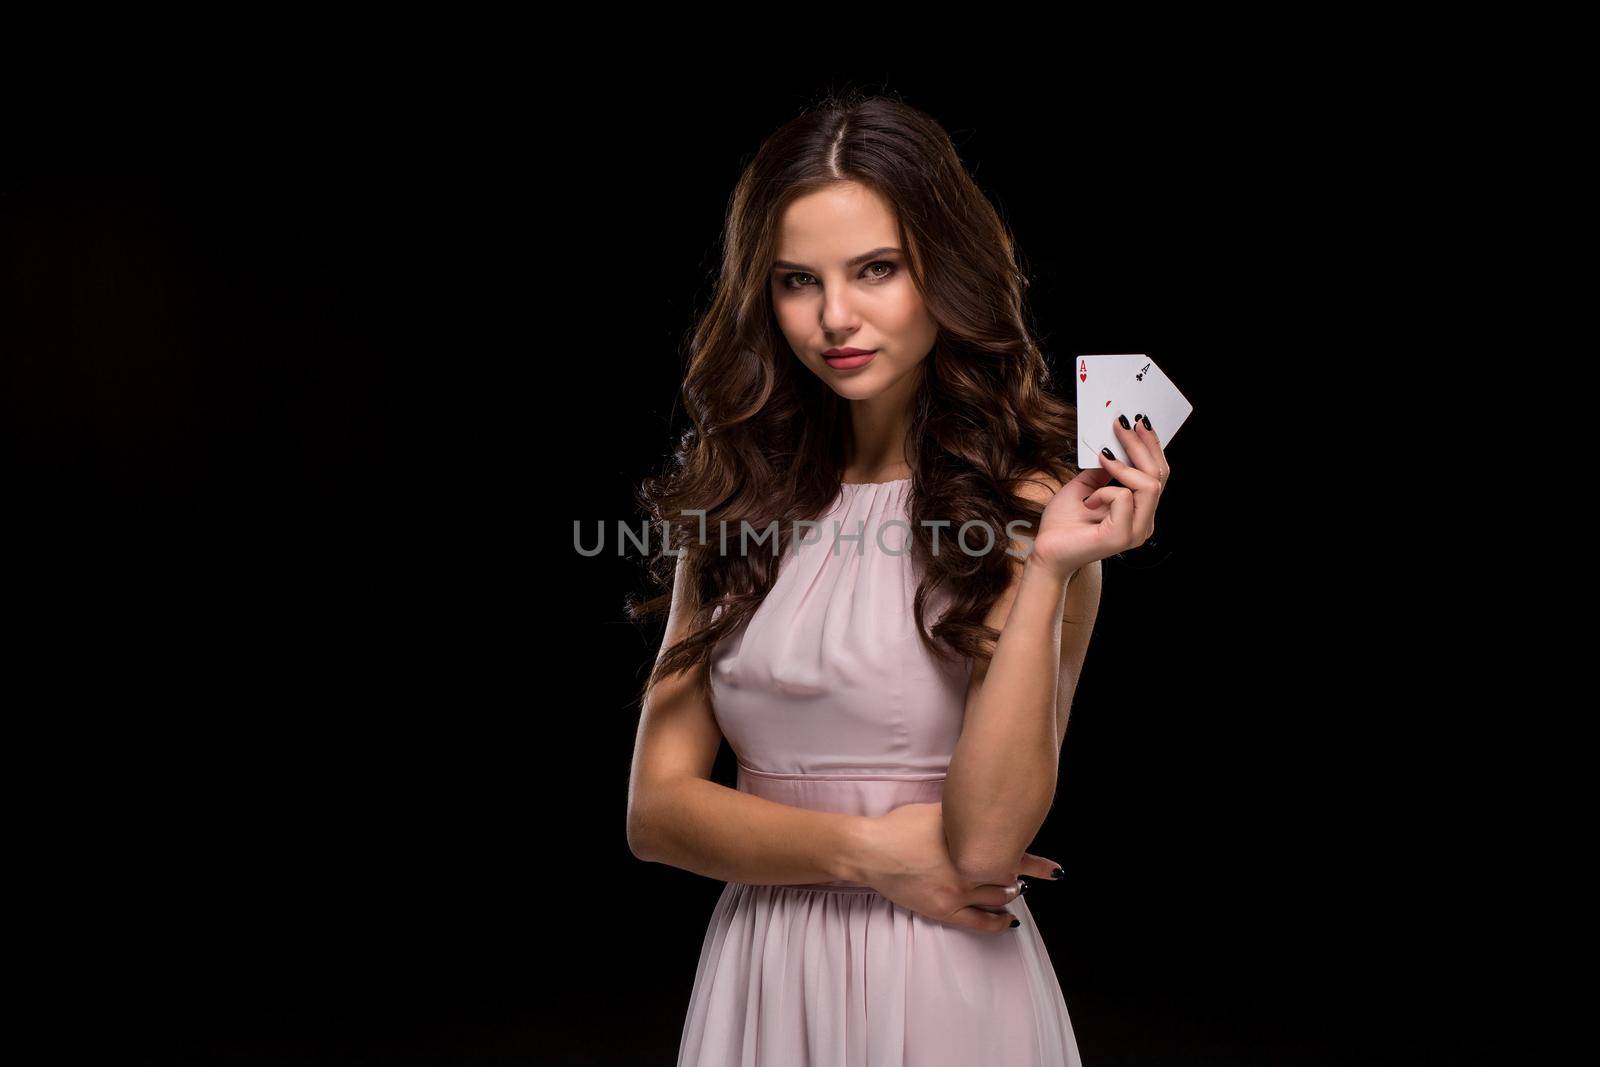 Attractive young woman in a sexy light dress holding the winning combination of poker cards. Two Aces. Studio shot on a black background. Casino